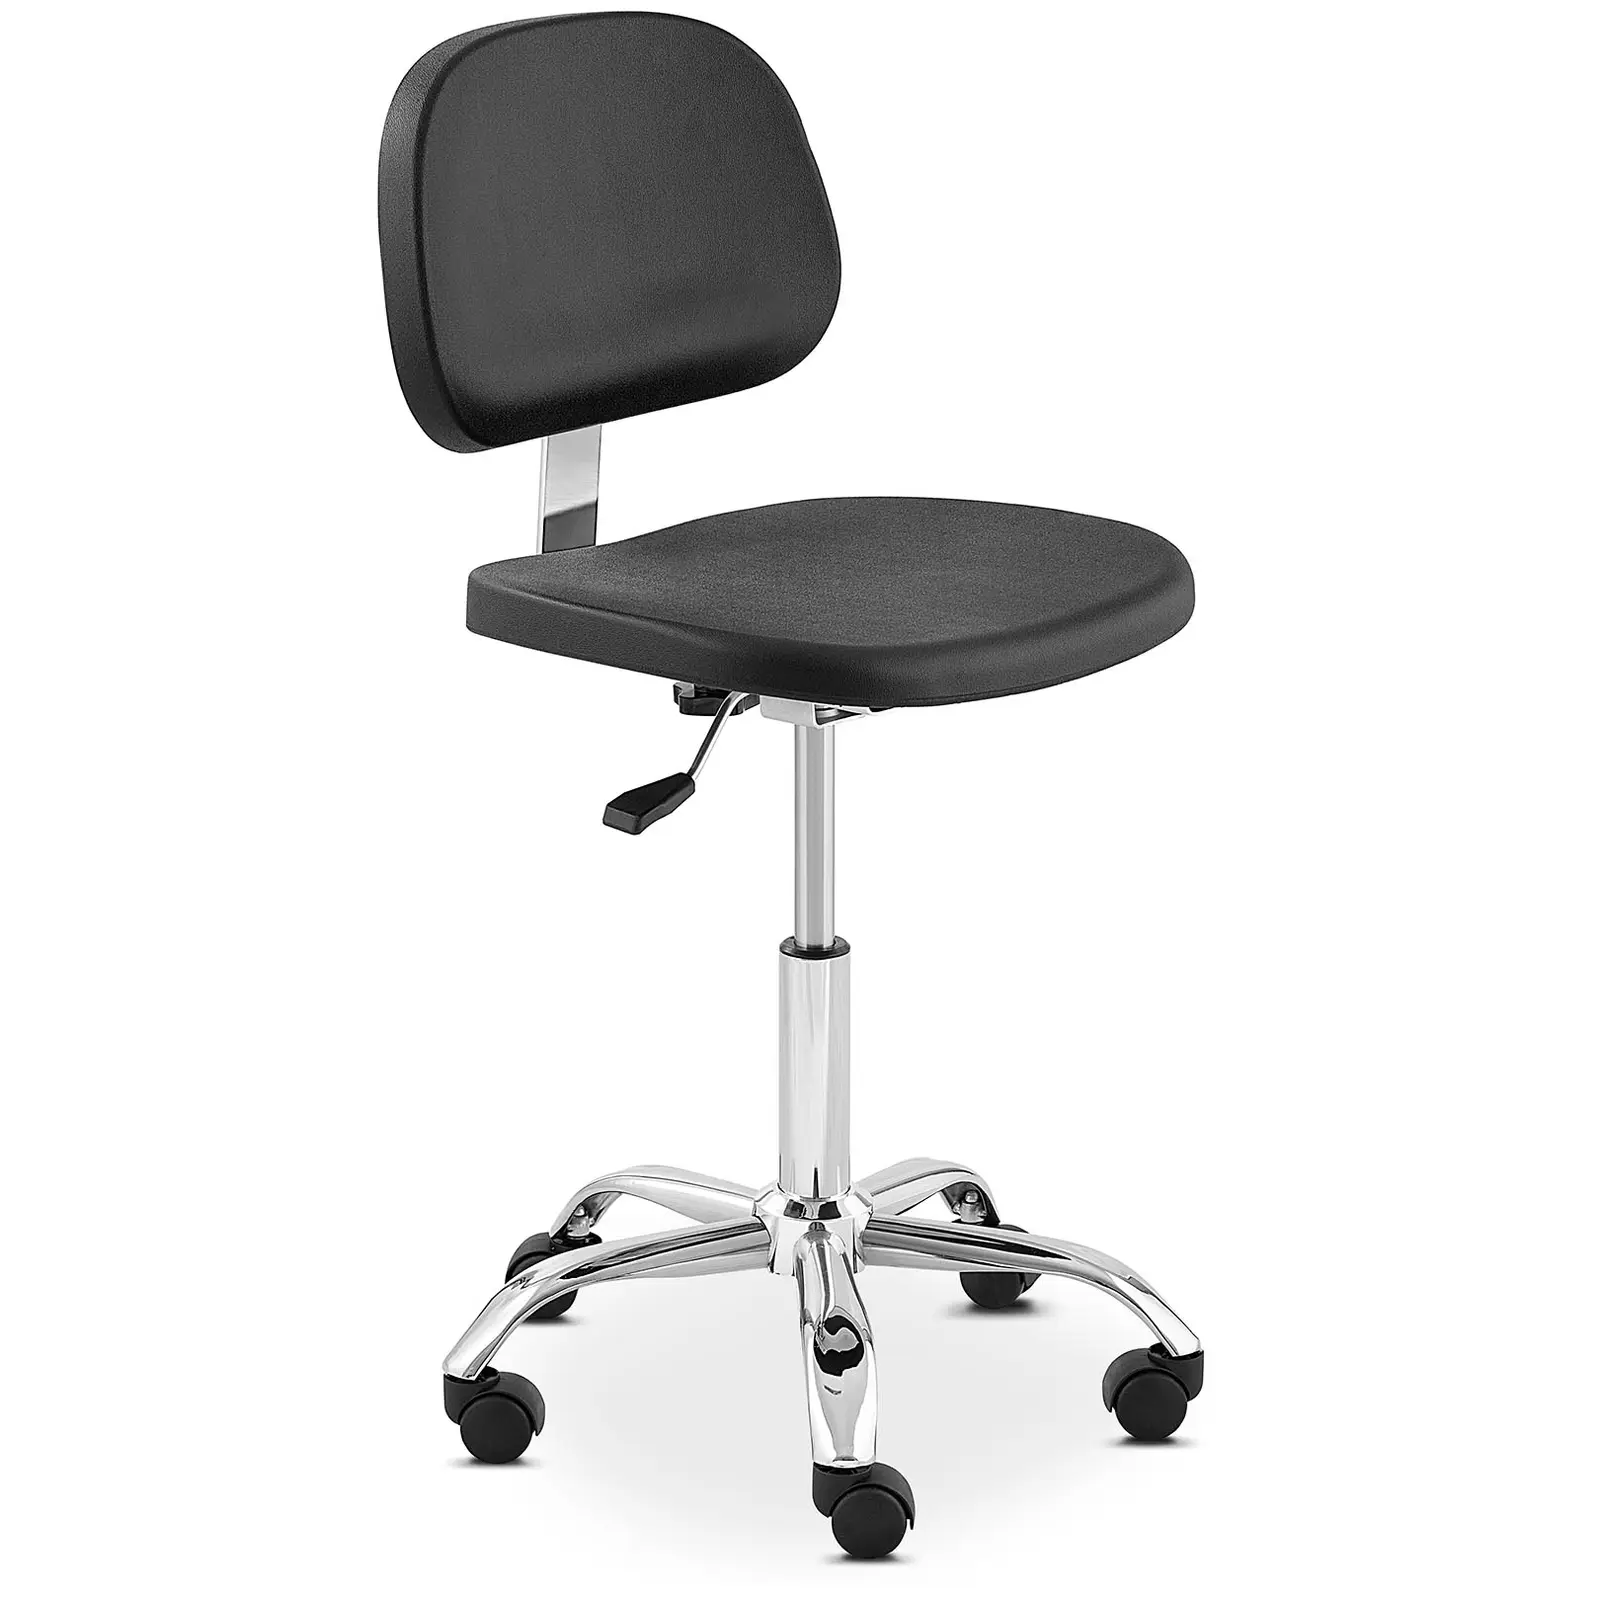 Laboratory chair - 120 kg - Black, Chrome - height adjustable from 450 - 585 mm